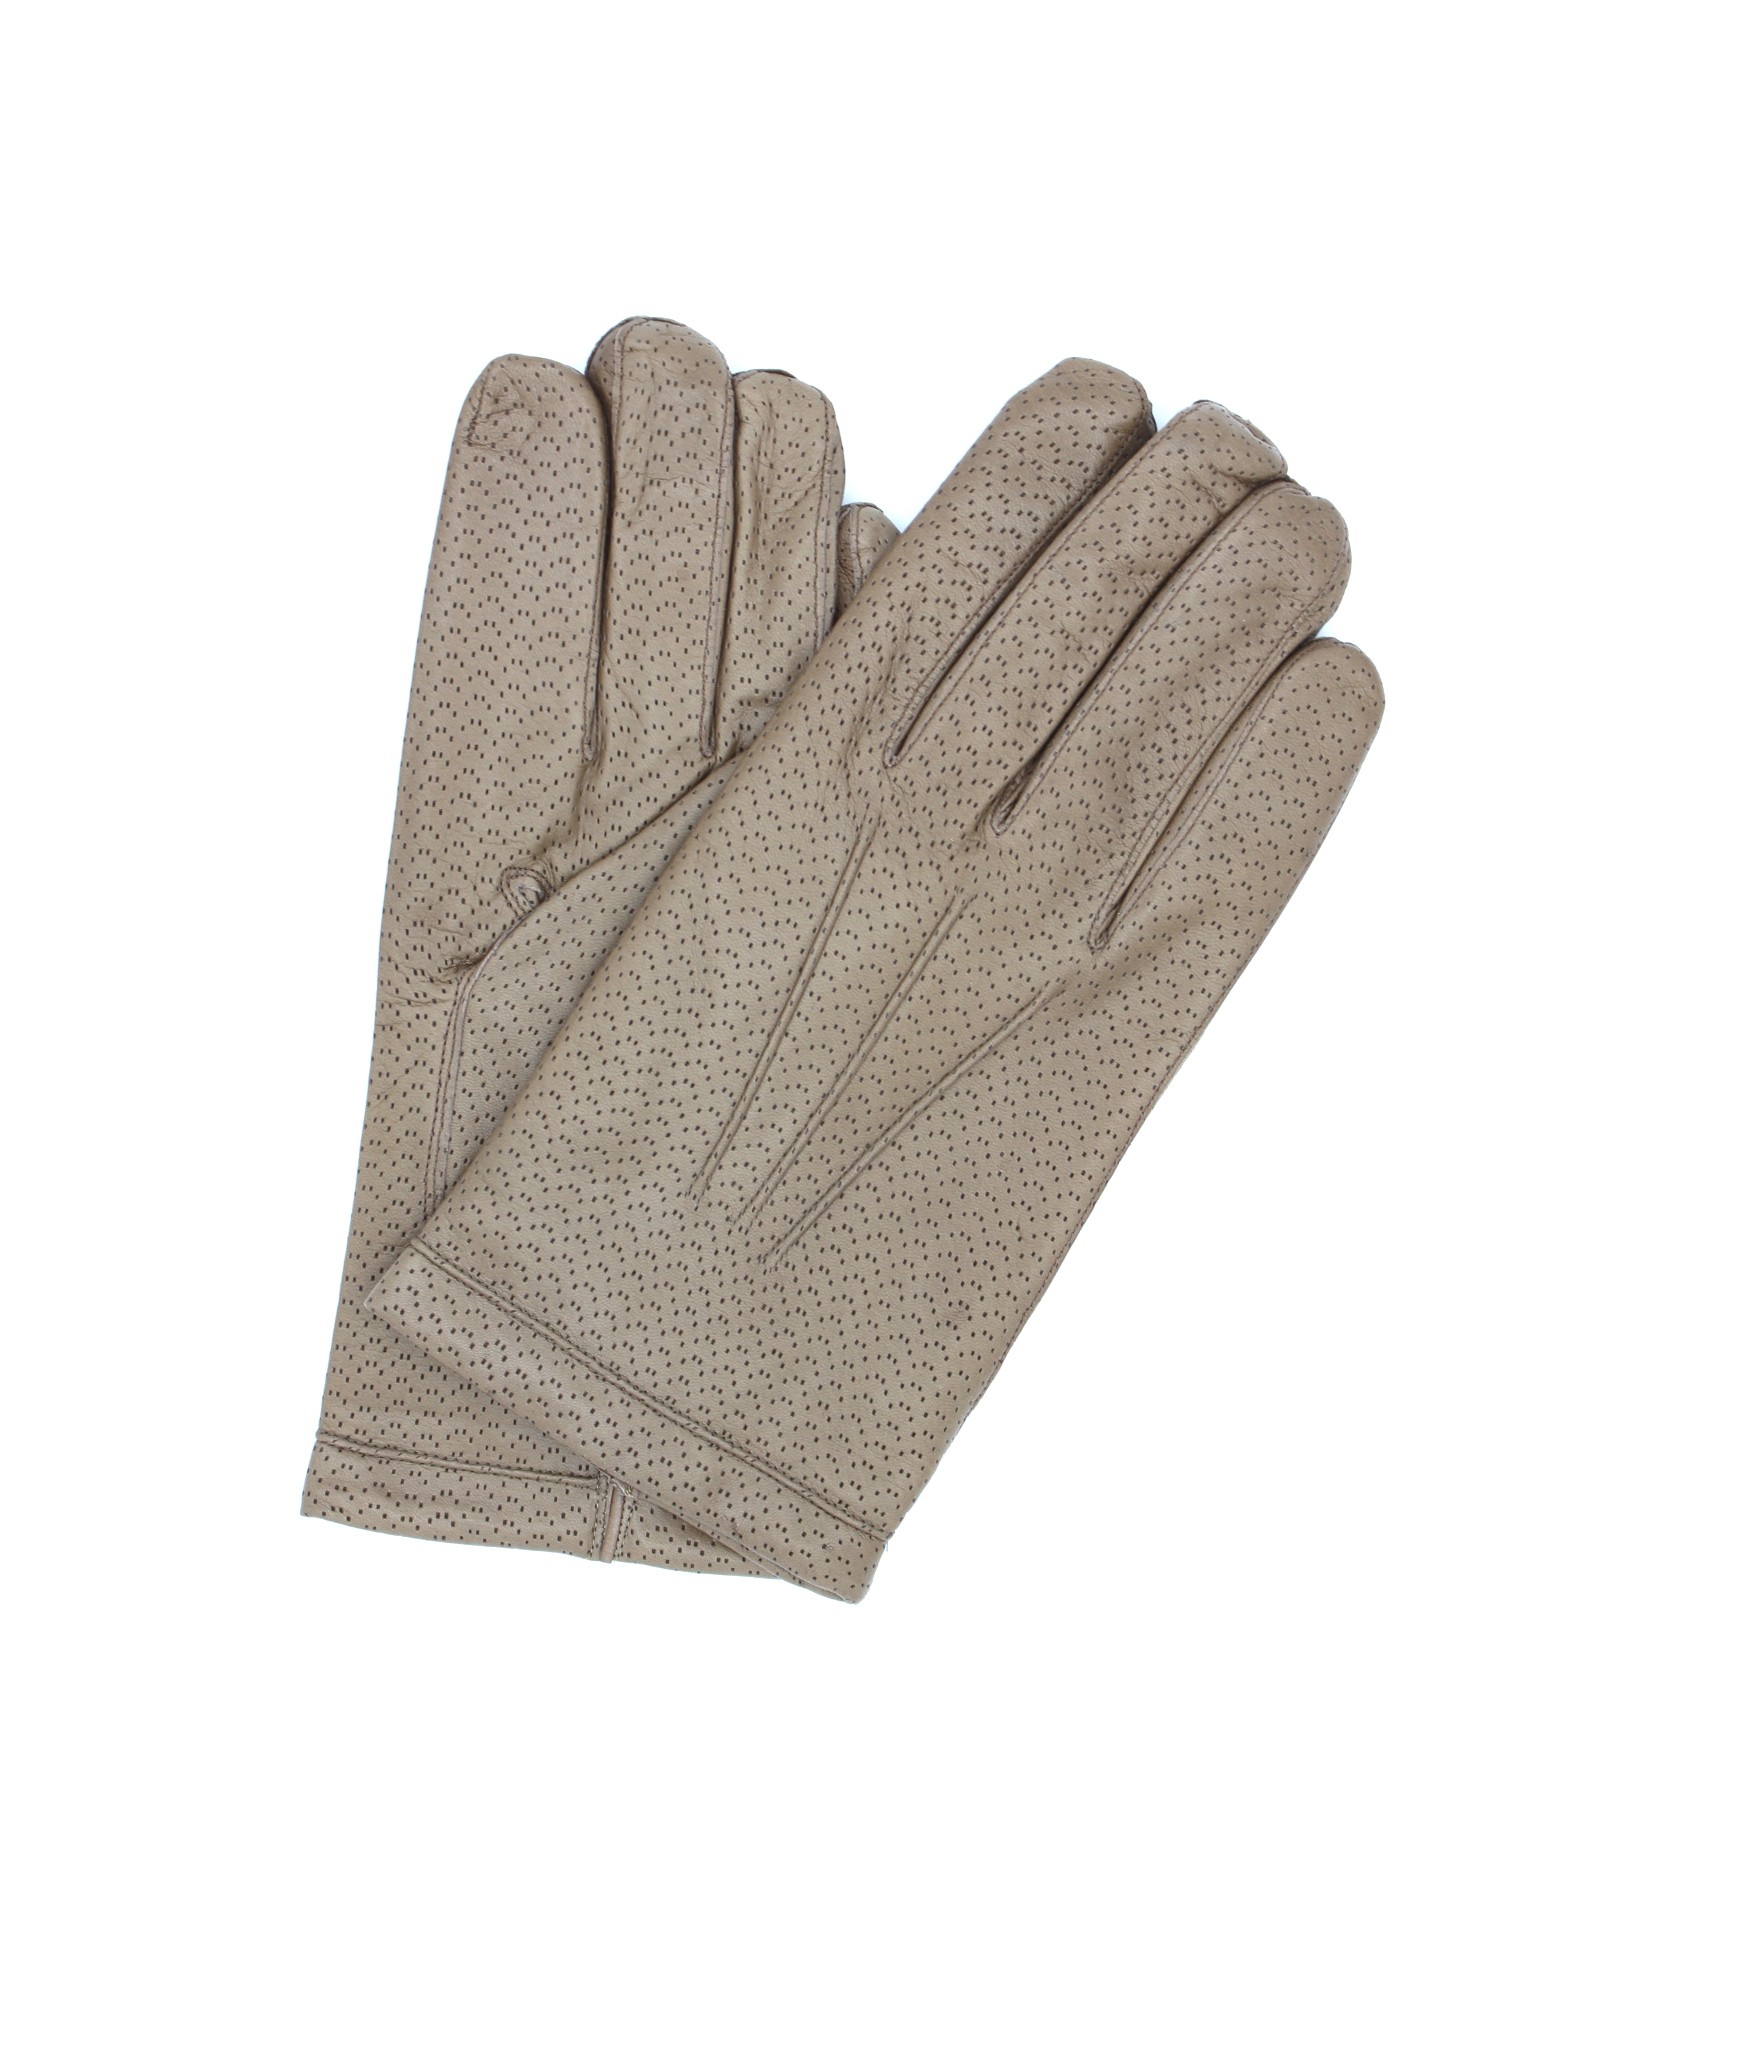 мужчина Easy Going Nappa leather gloves 2bt cashmere lined Mud